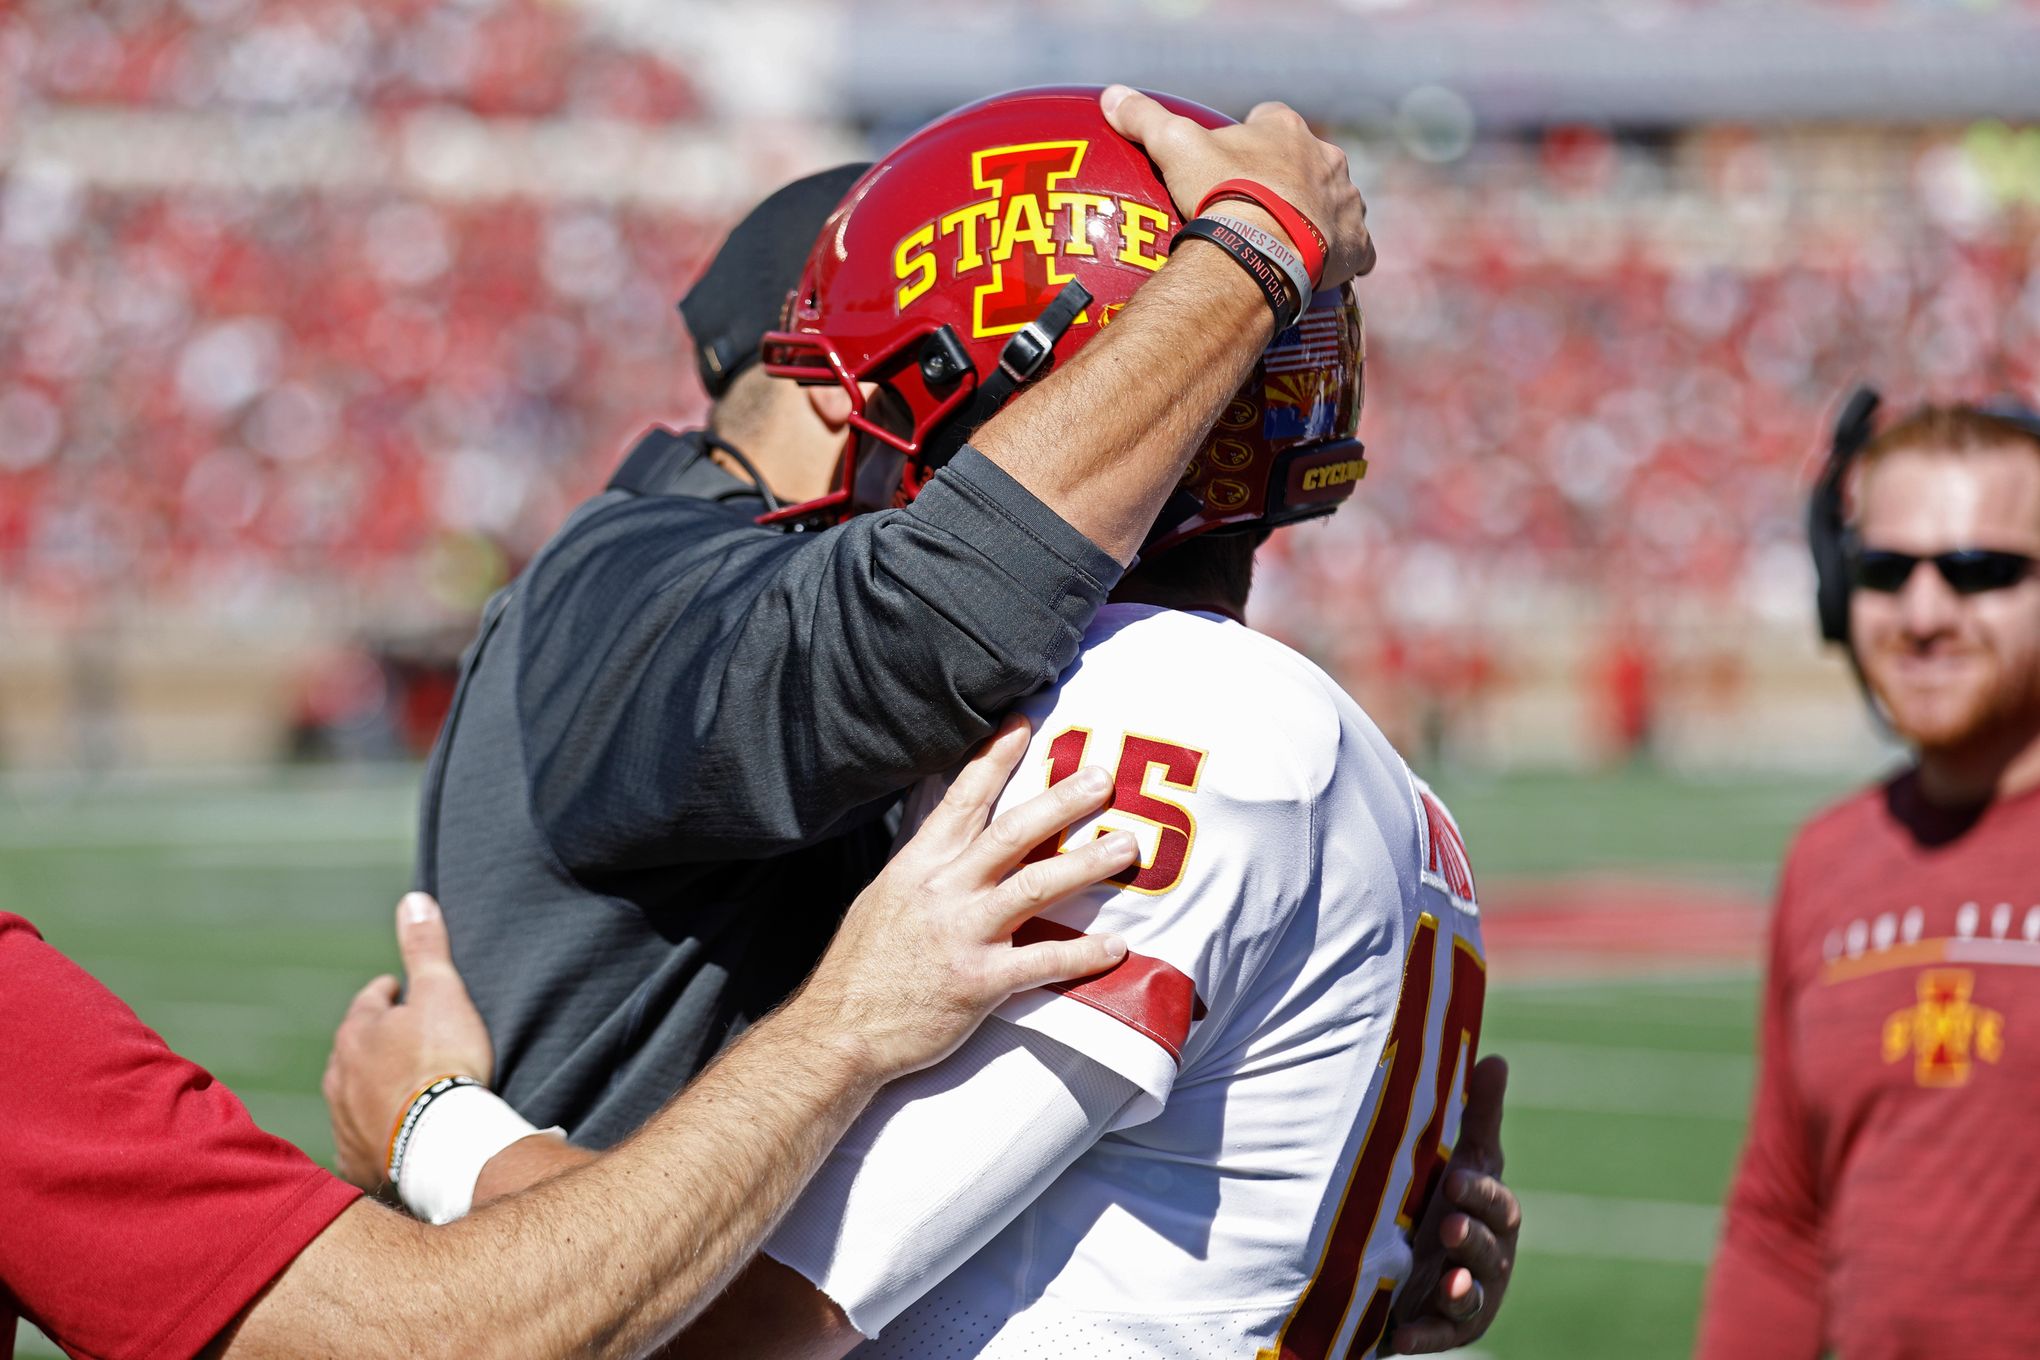 Texas Tech vs. Iowa State: What to Know For Saturday